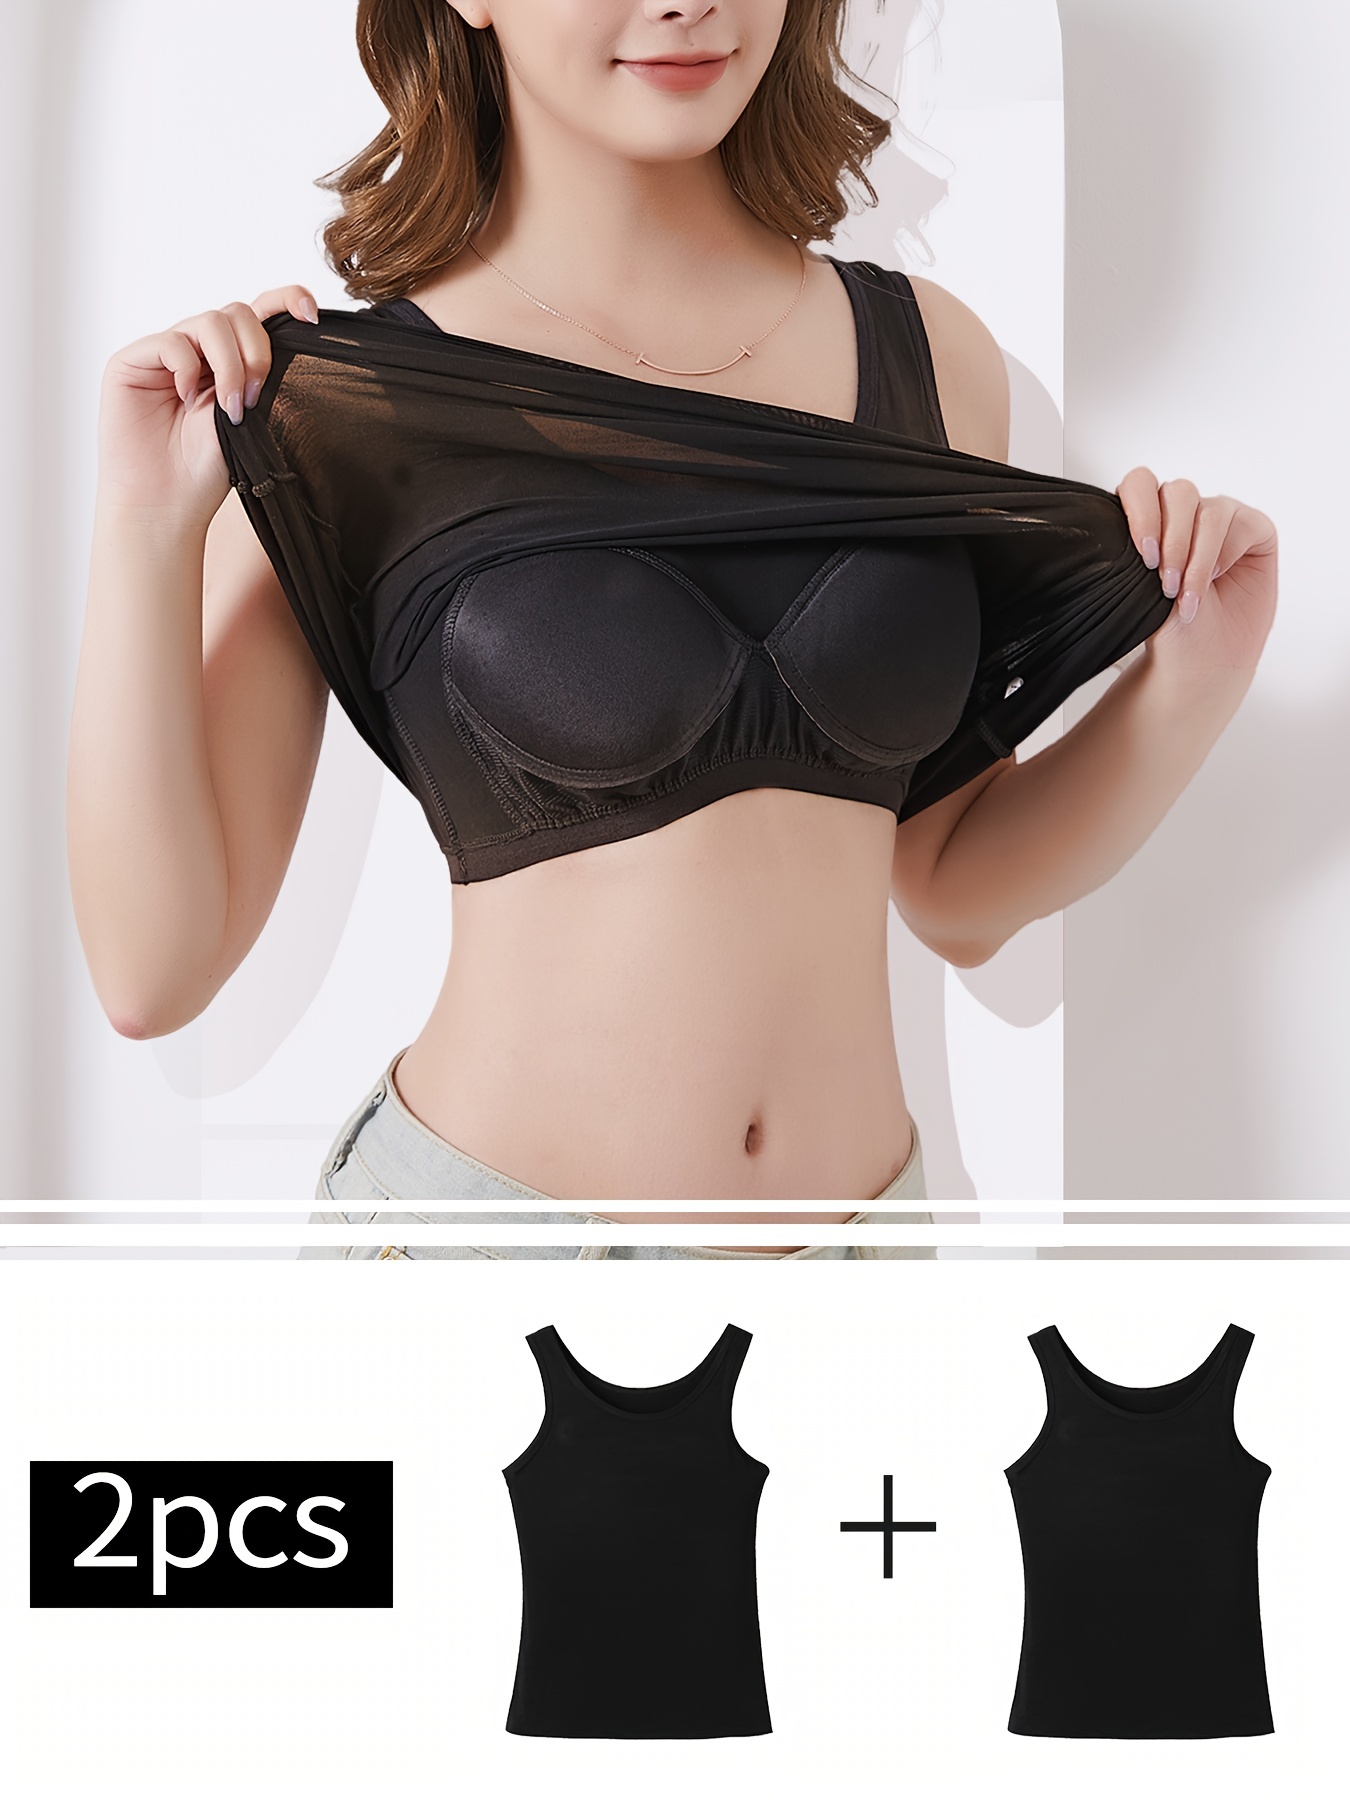 Buy New Design Ladies Parachute-like Crossover Strapless Bra Camisole Tank  Top from Shantou Shi Wei Knitting Co., Ltd., China